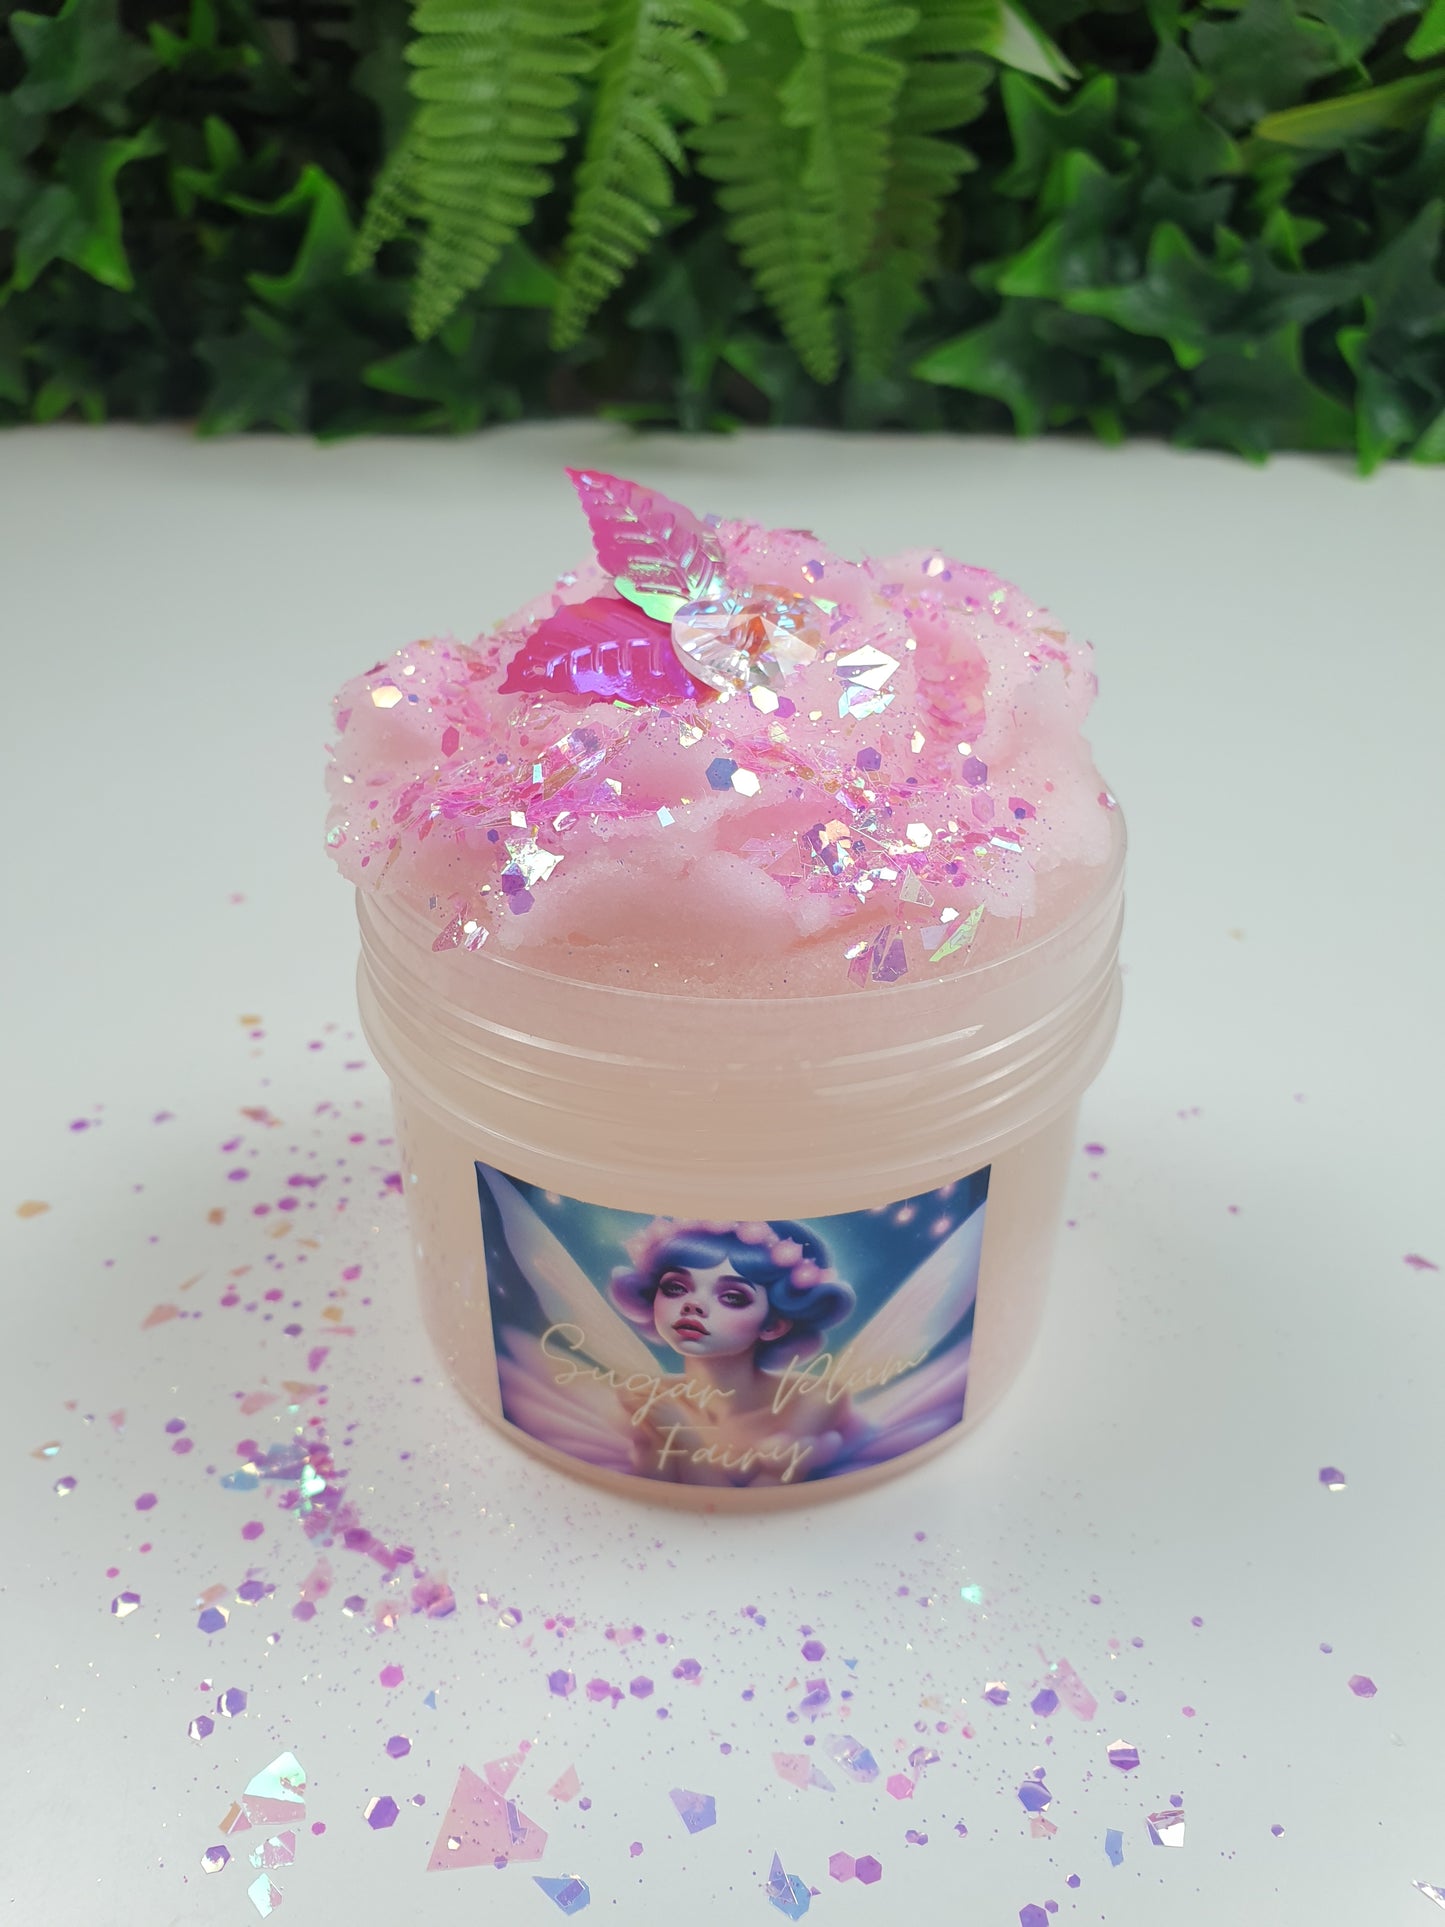 Pink Icee Slime with Sparkles Glitter and Hear Charm Handmade in Australia